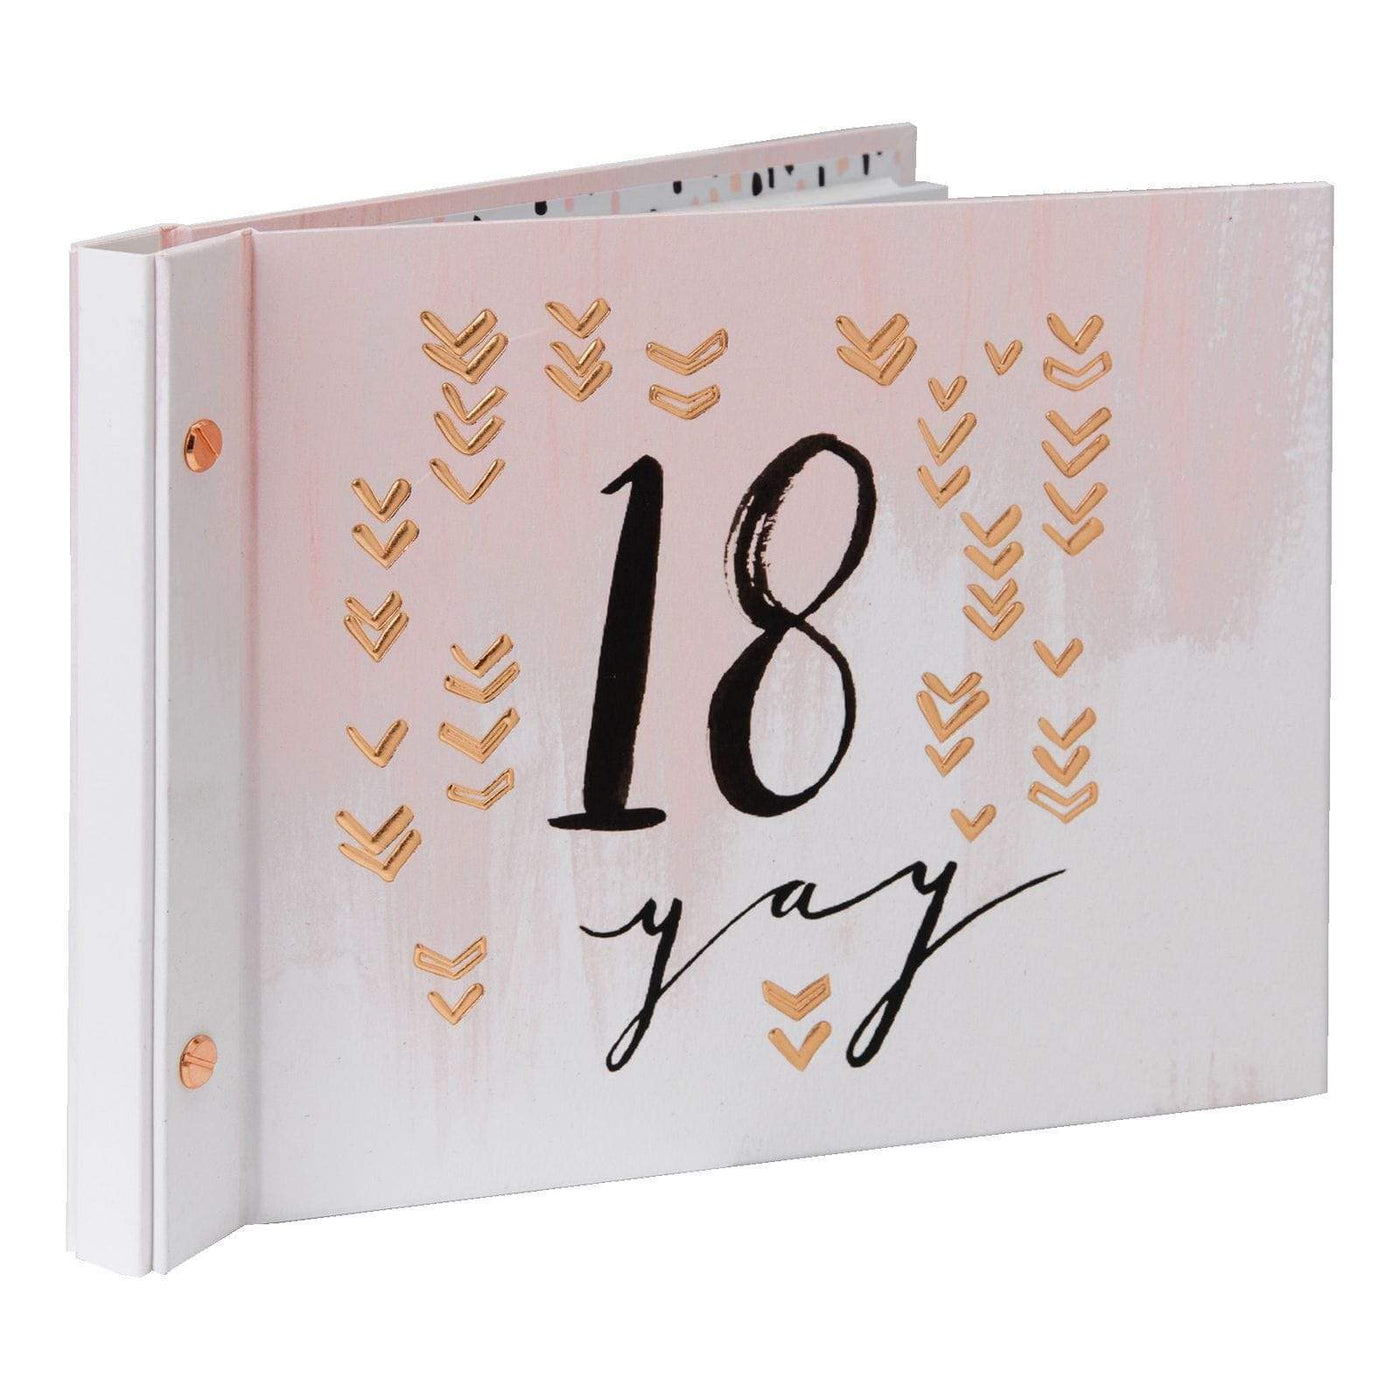 Widdop Gifts Photo Frames & Albums Ladies 18th Birthday Photo Album with Message Space